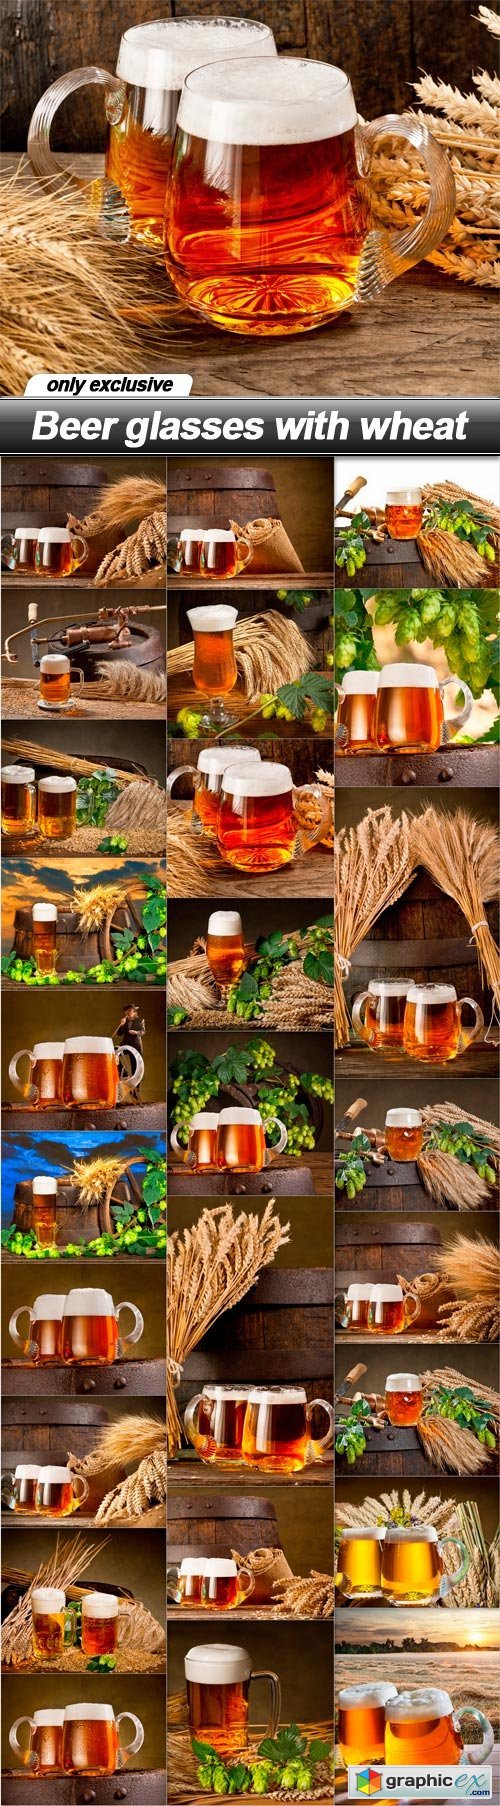 Beer glasses with wheat - 26 UHQ JPEG